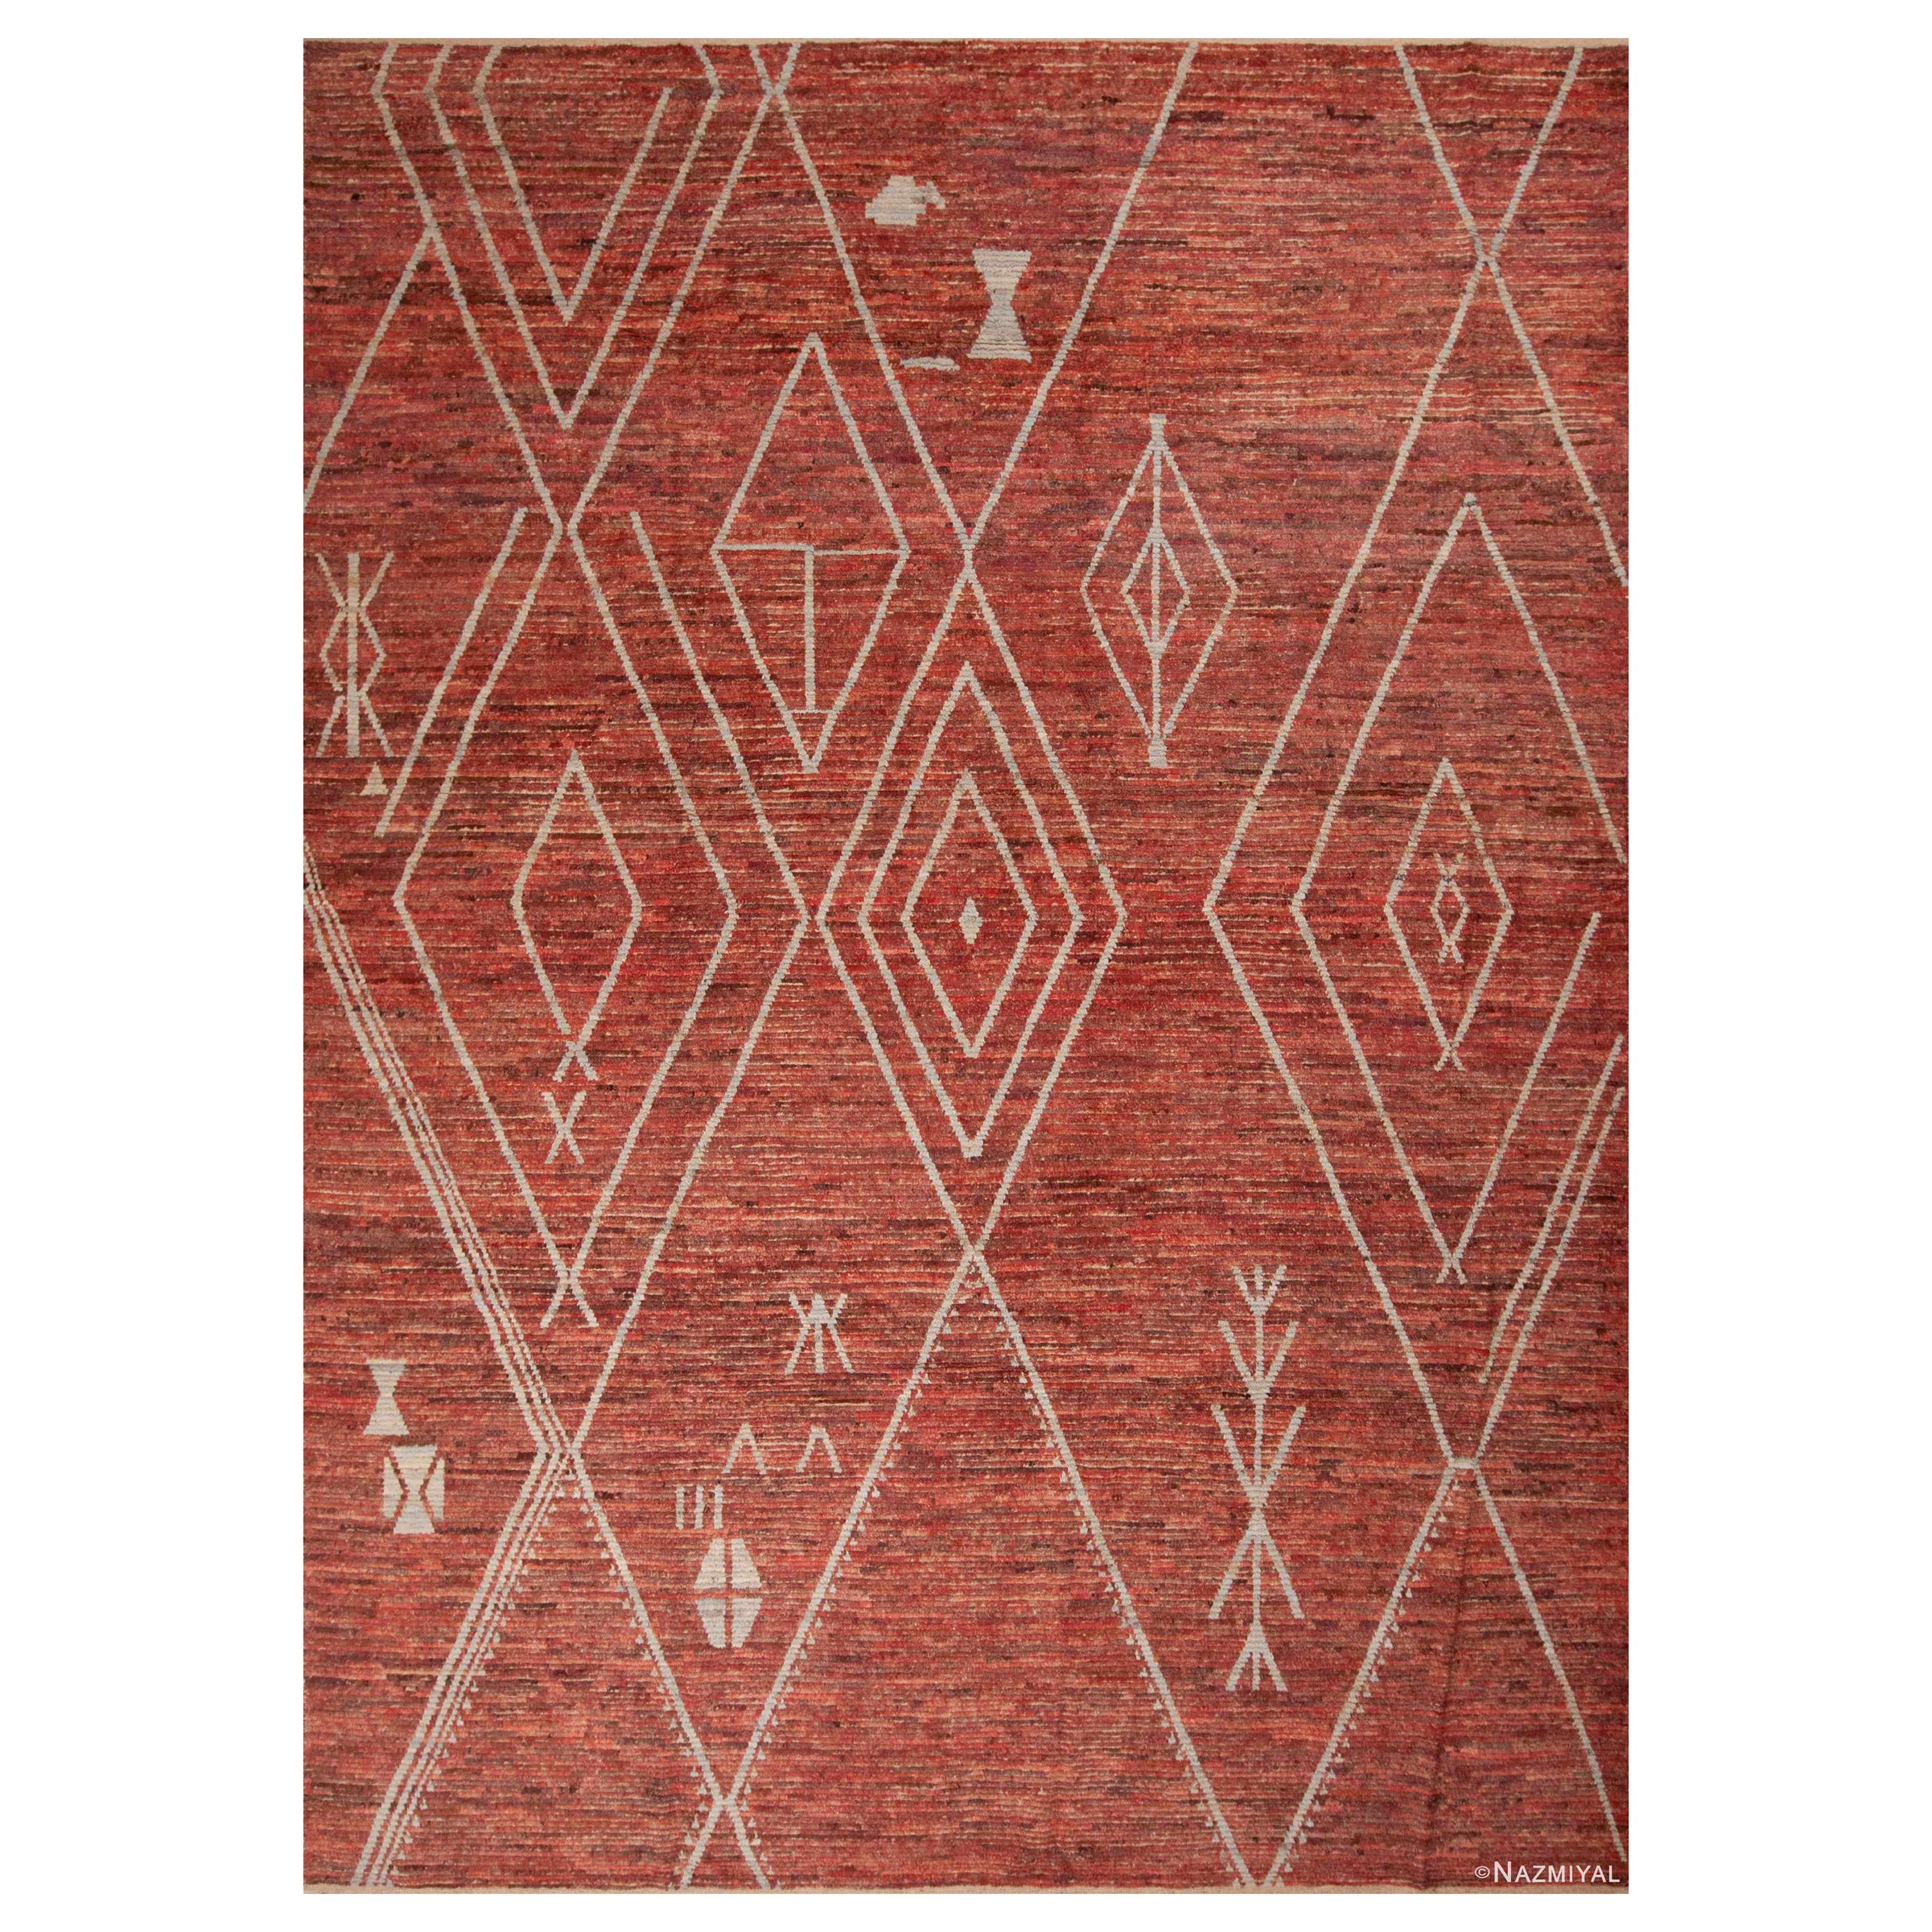 Nazmiyal Collection Tribal Beni Ourain Design Modern Rustic Rug 10'2" x 14'2" For Sale